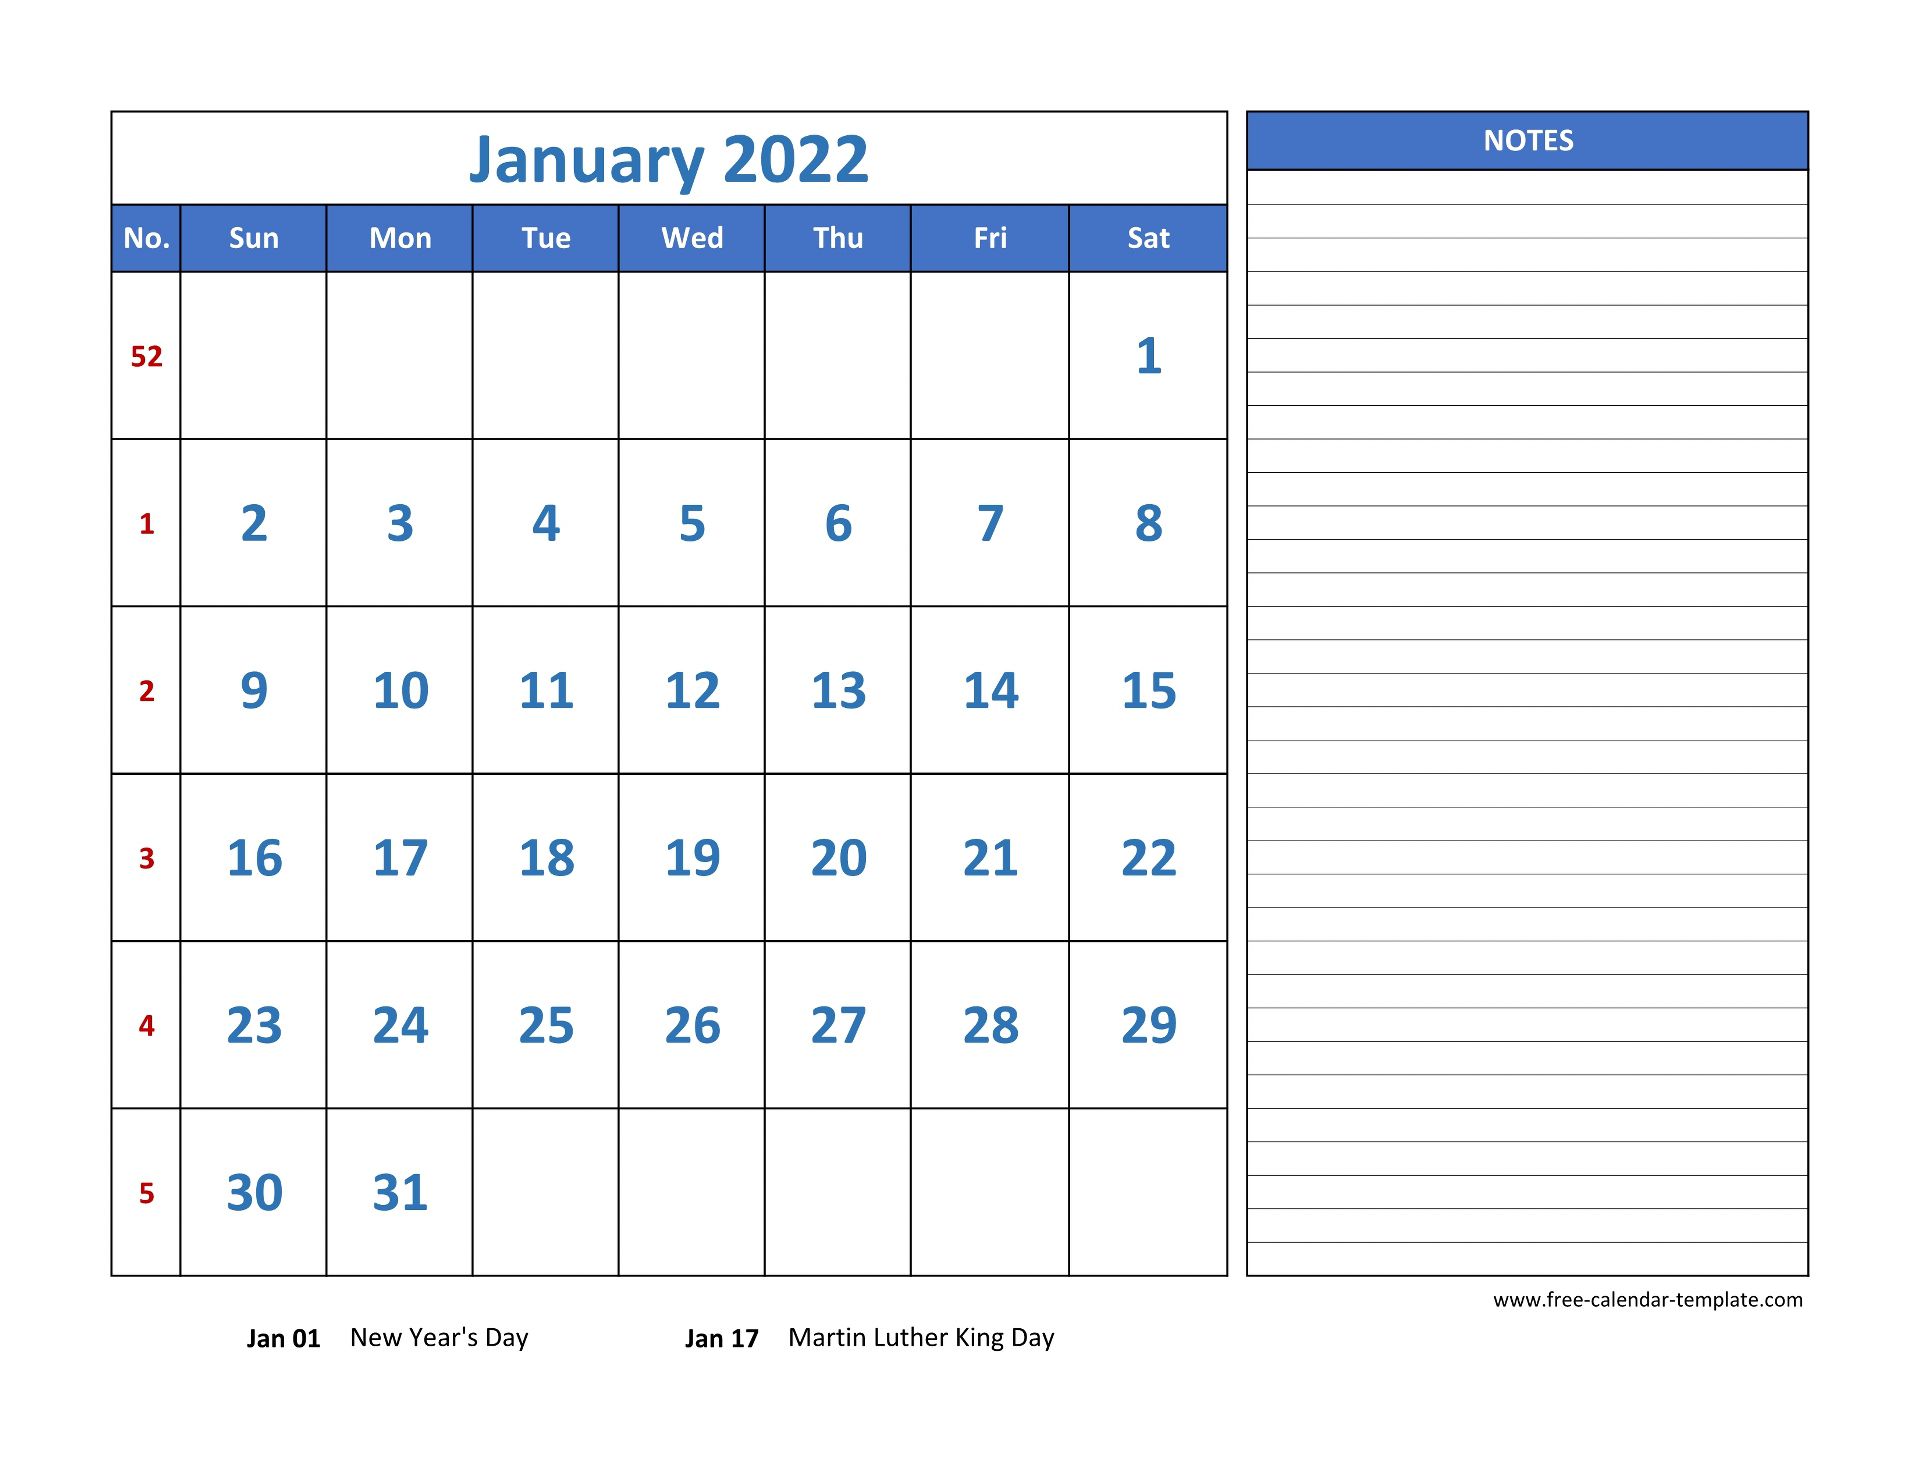 january calendar 2022 grid lines for holidays and notes horizontal